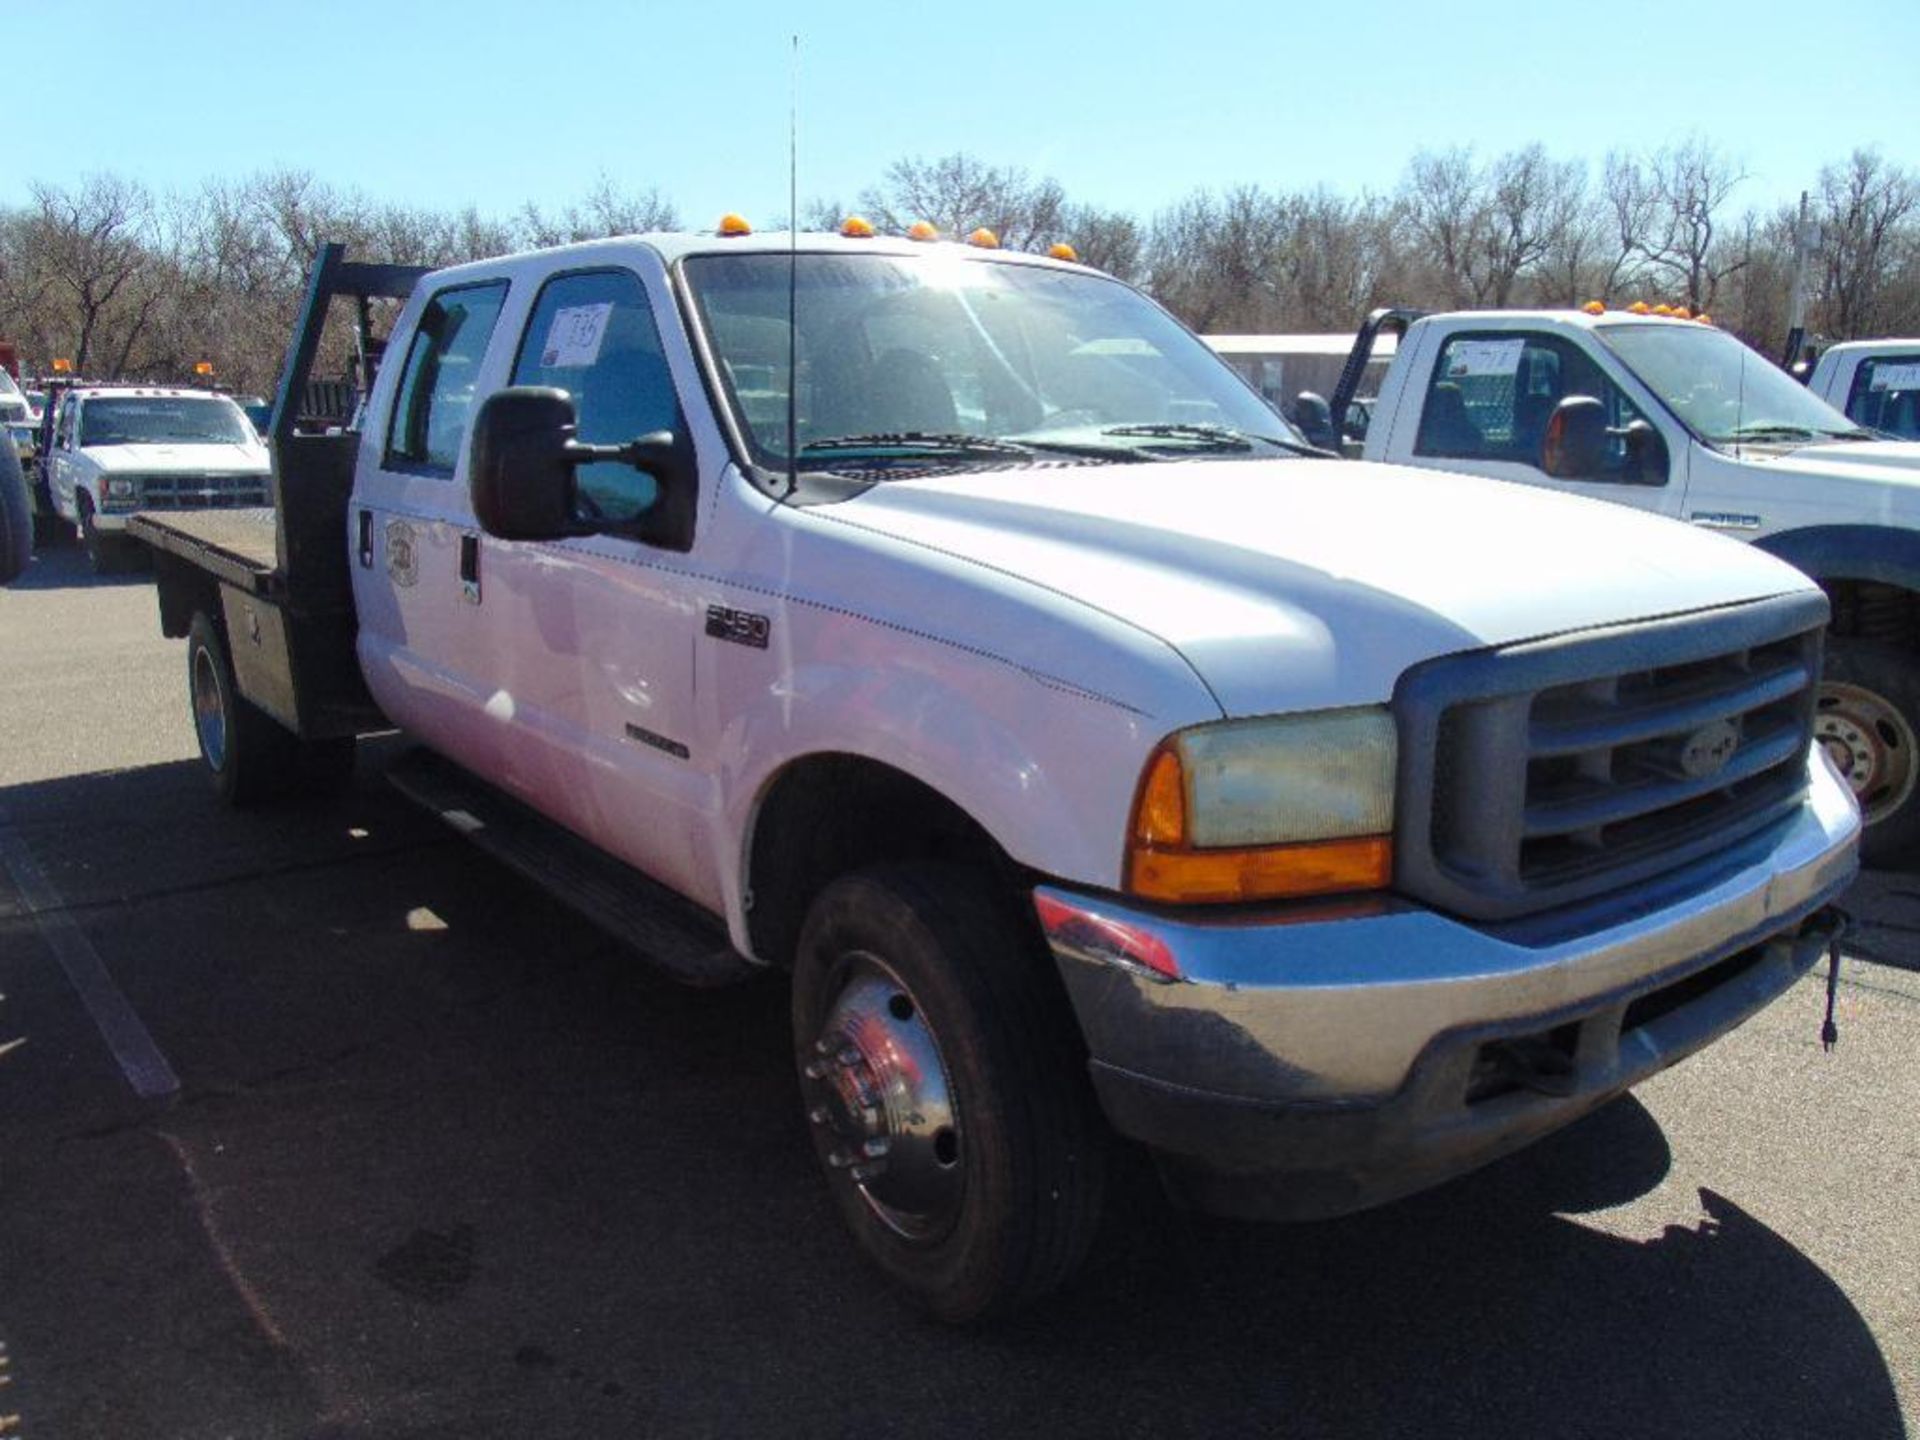 2001 Ford F450 Crewcab Flatbed s/n 1fdxw46f81ec38467, 7.3 diesel eng, auto trans, od reads 265046 - Image 4 of 7